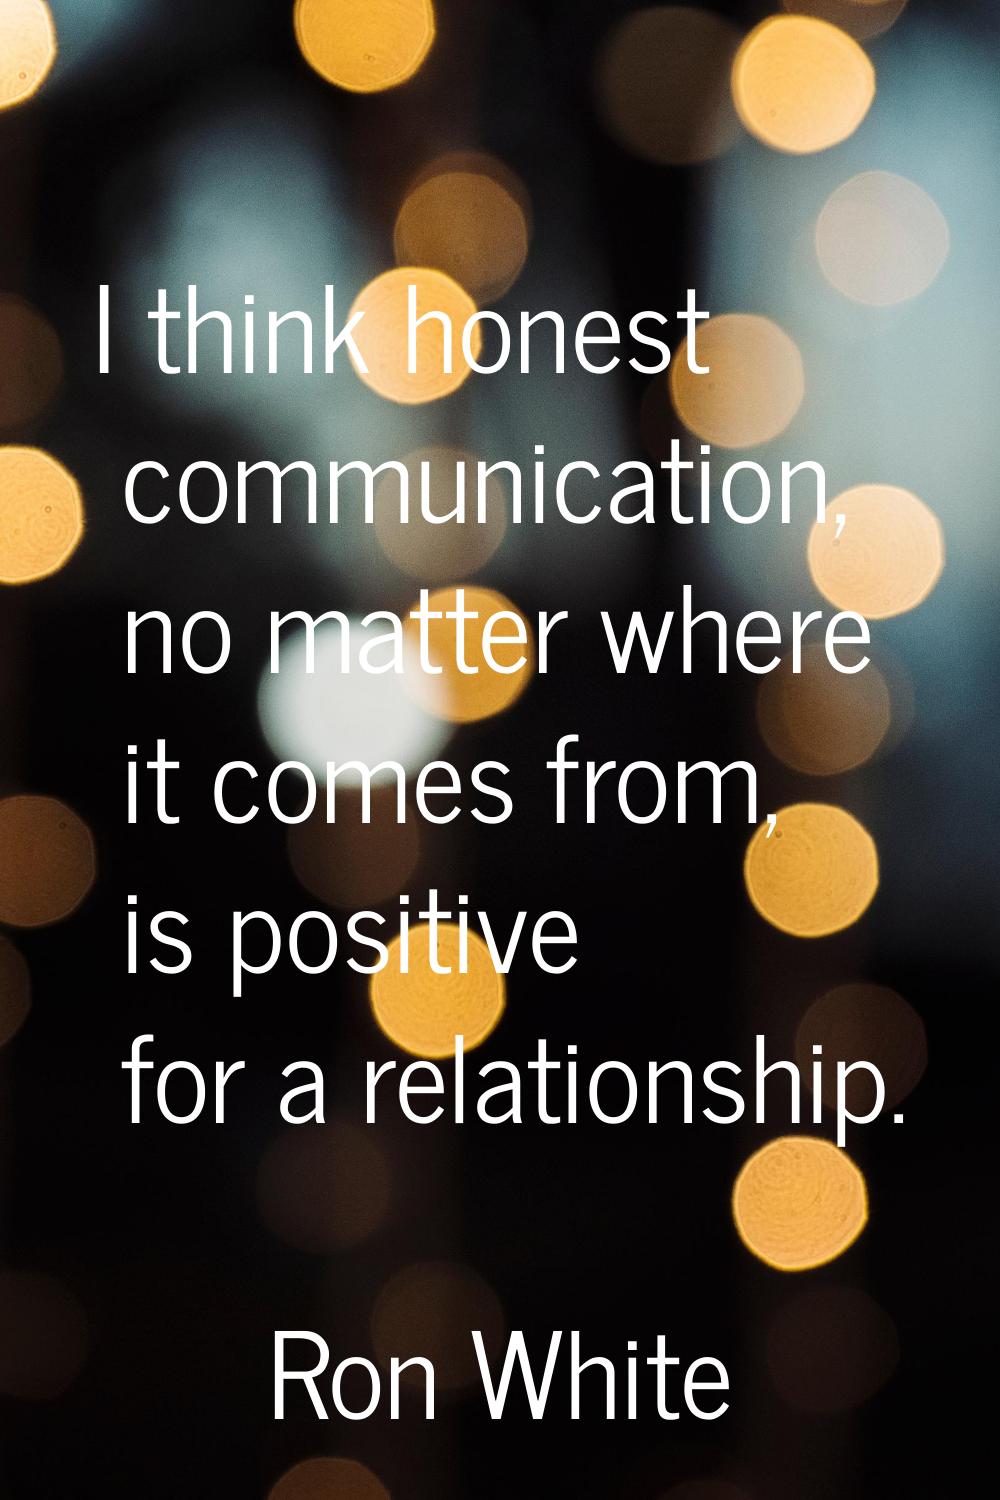 I think honest communication, no matter where it comes from, is positive for a relationship.